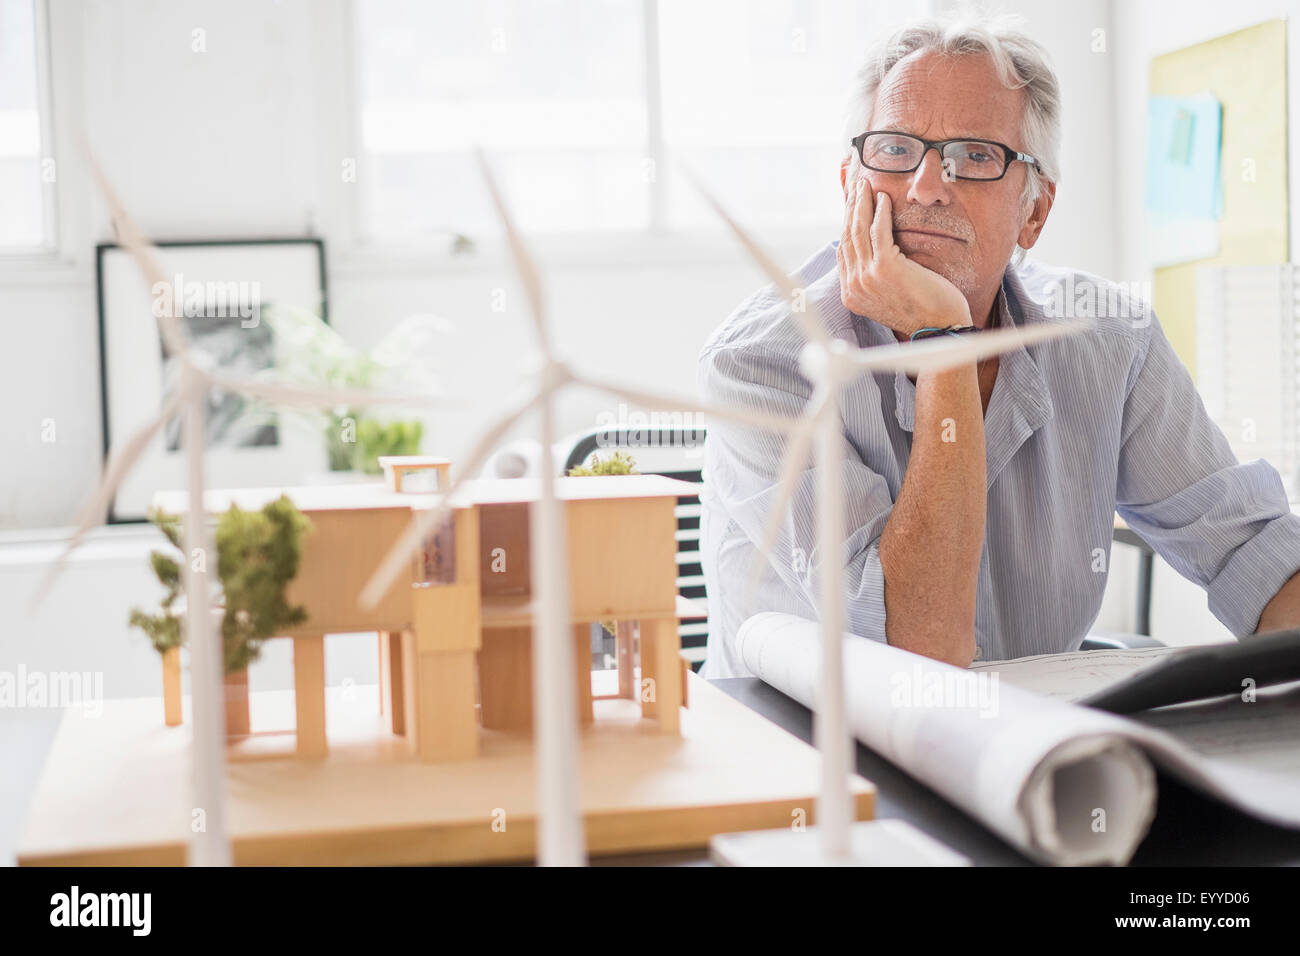 Older Caucasian architect examining scale model in office Stock Photo